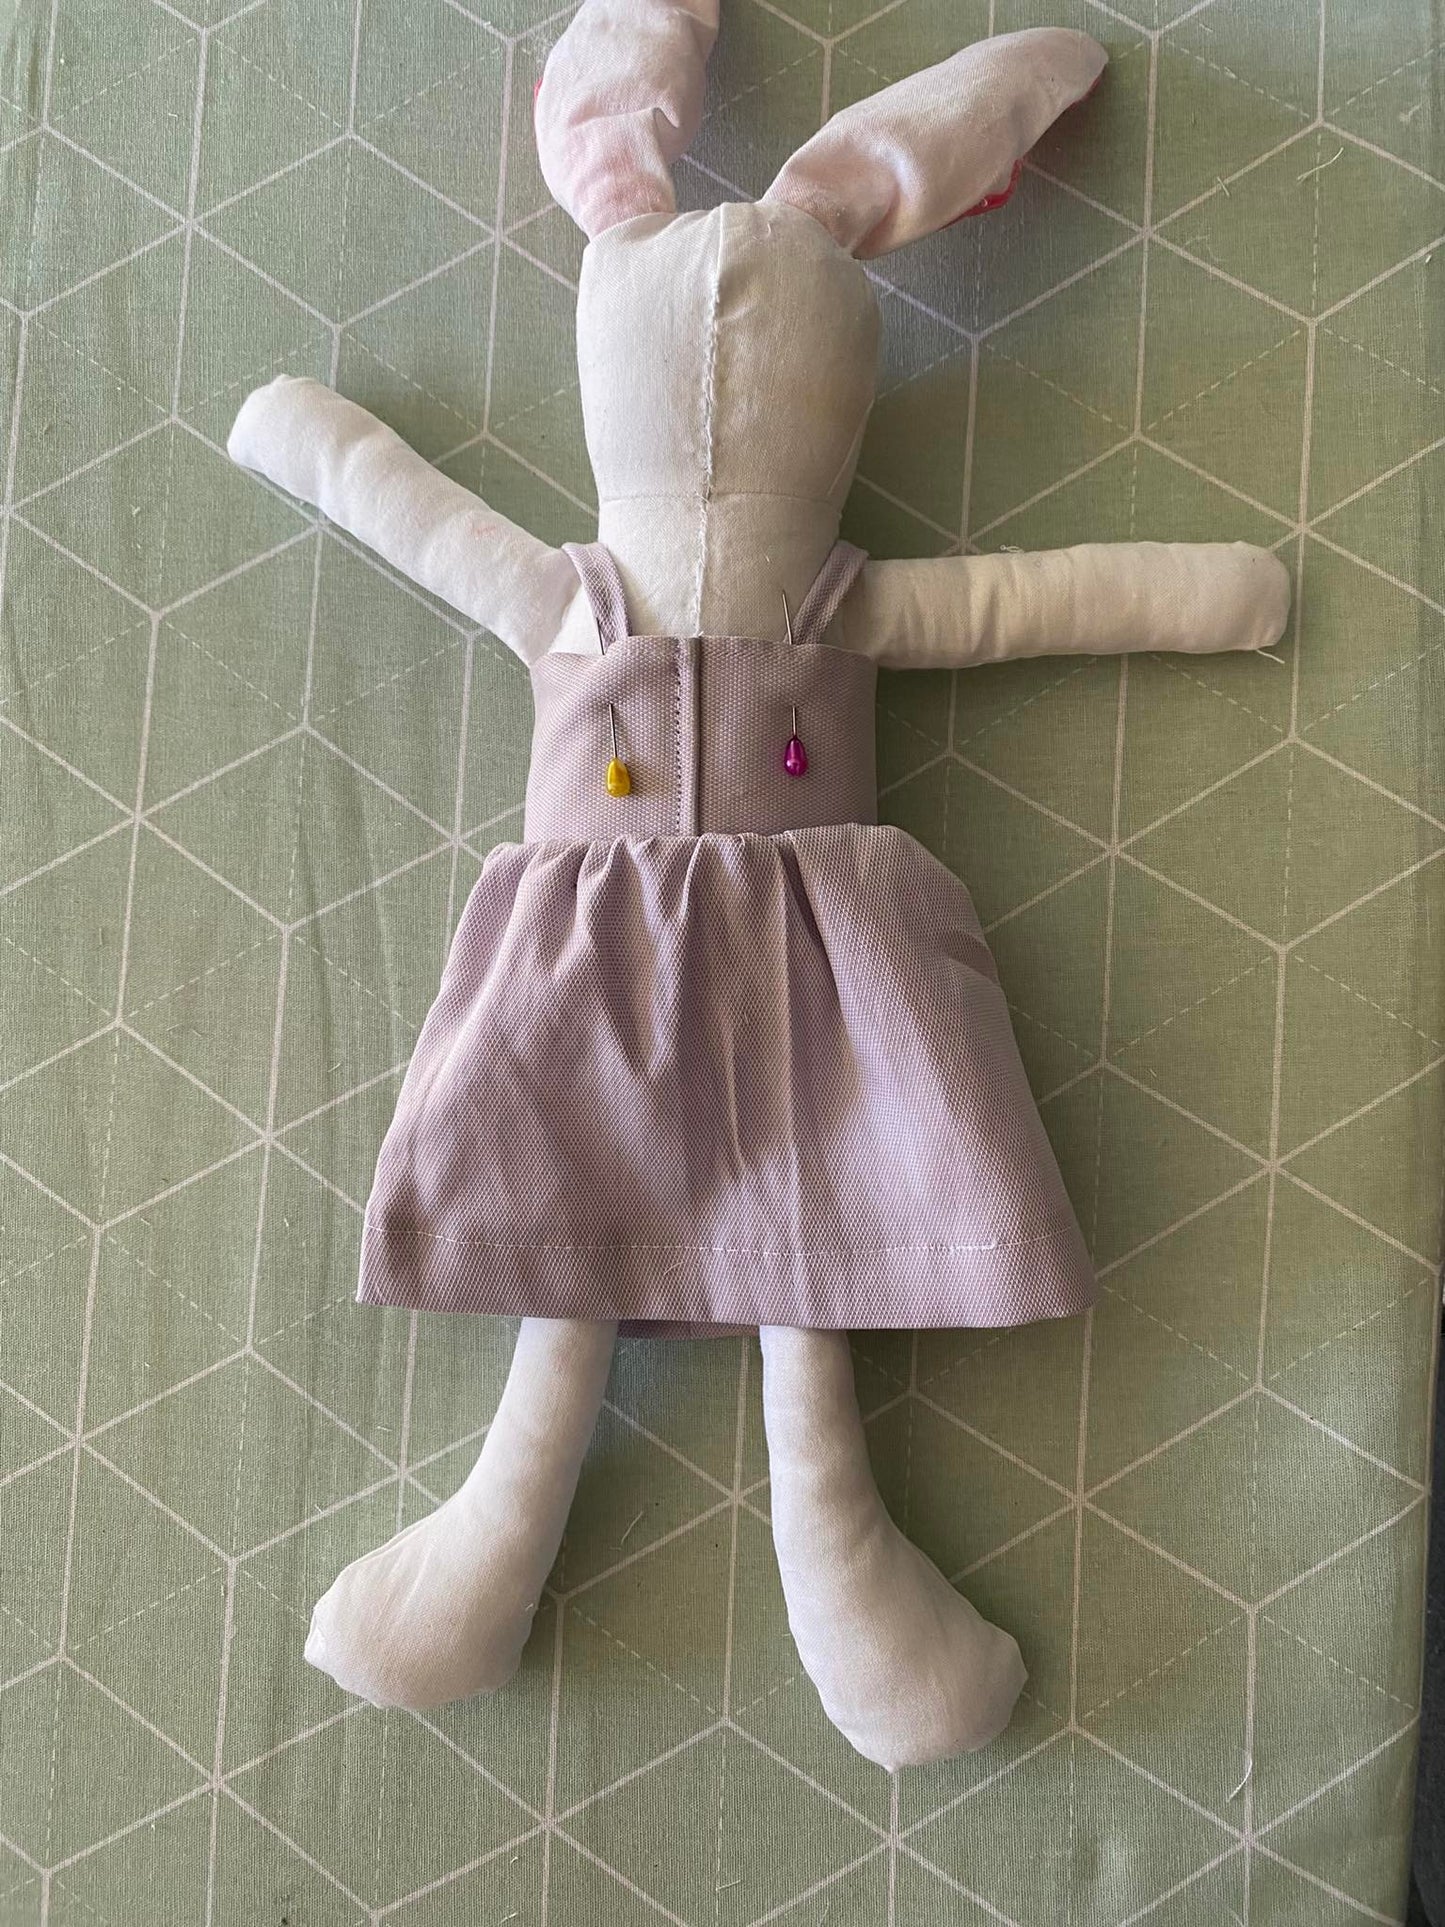 Bunny sewing pattern wearing recycled shirt dress